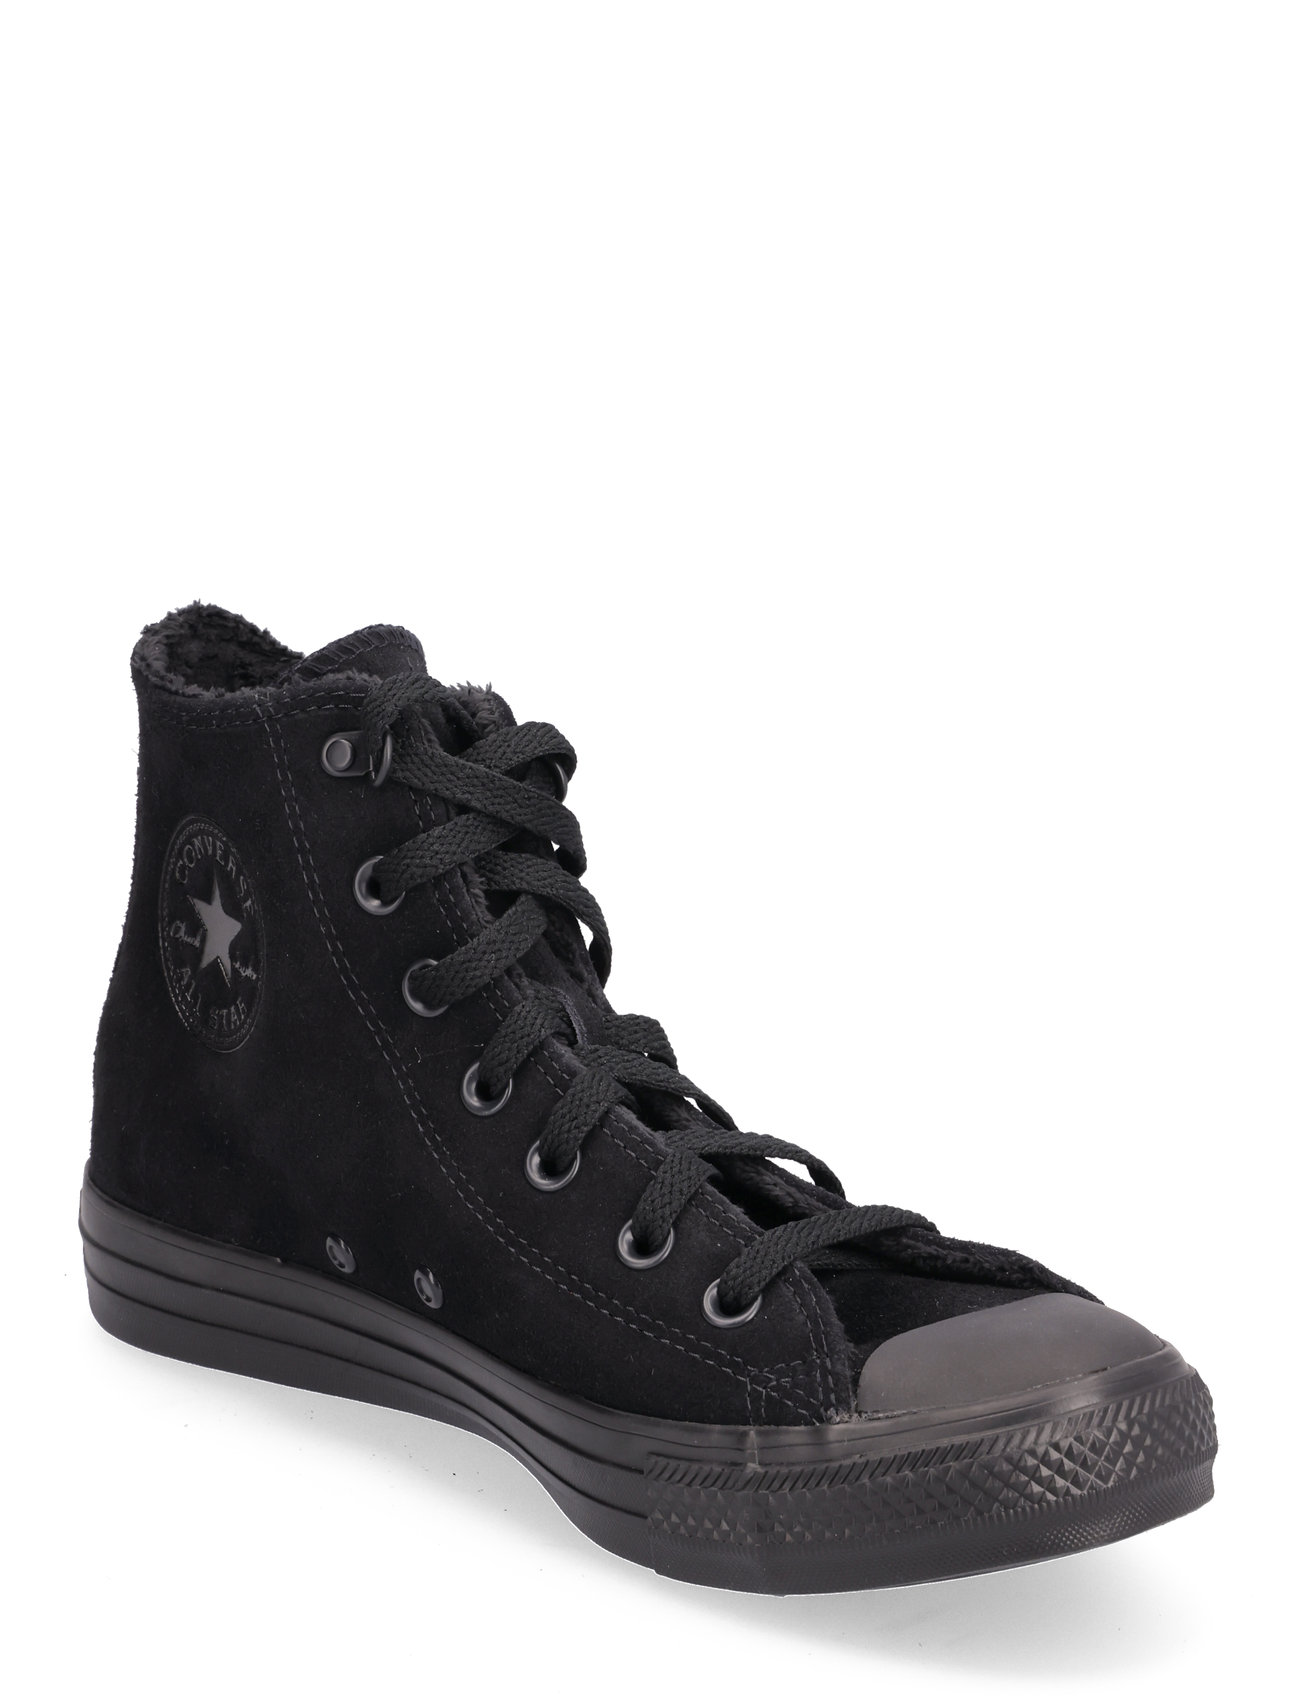 Chuck Taylor All Star Sport Sneakers High-top Sneakers Black Converse